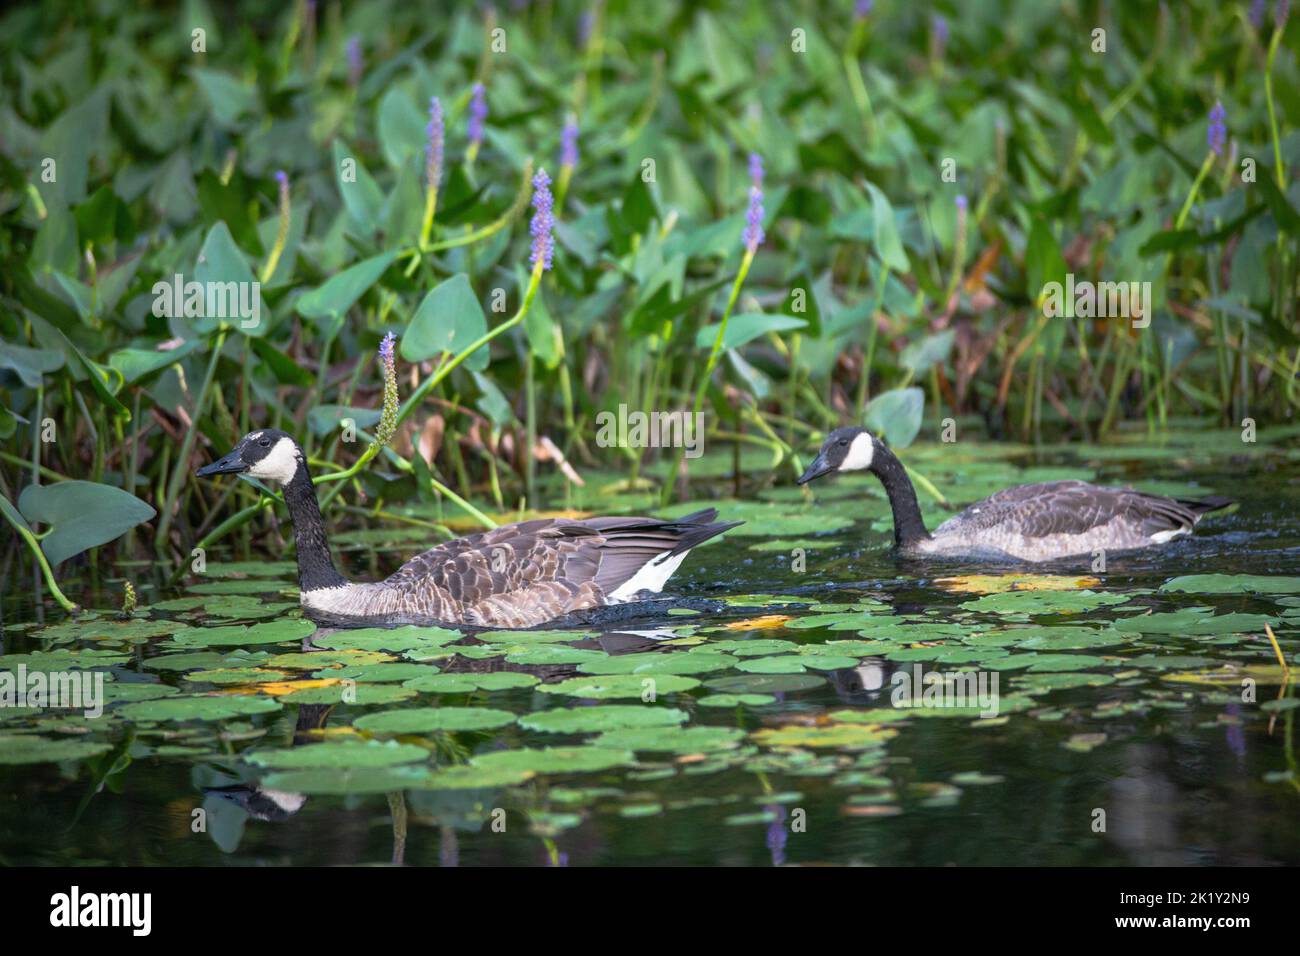 A pair of Canada geese, Branta canadensis captured swimming on a lake covered by lotus leaves Stock Photo